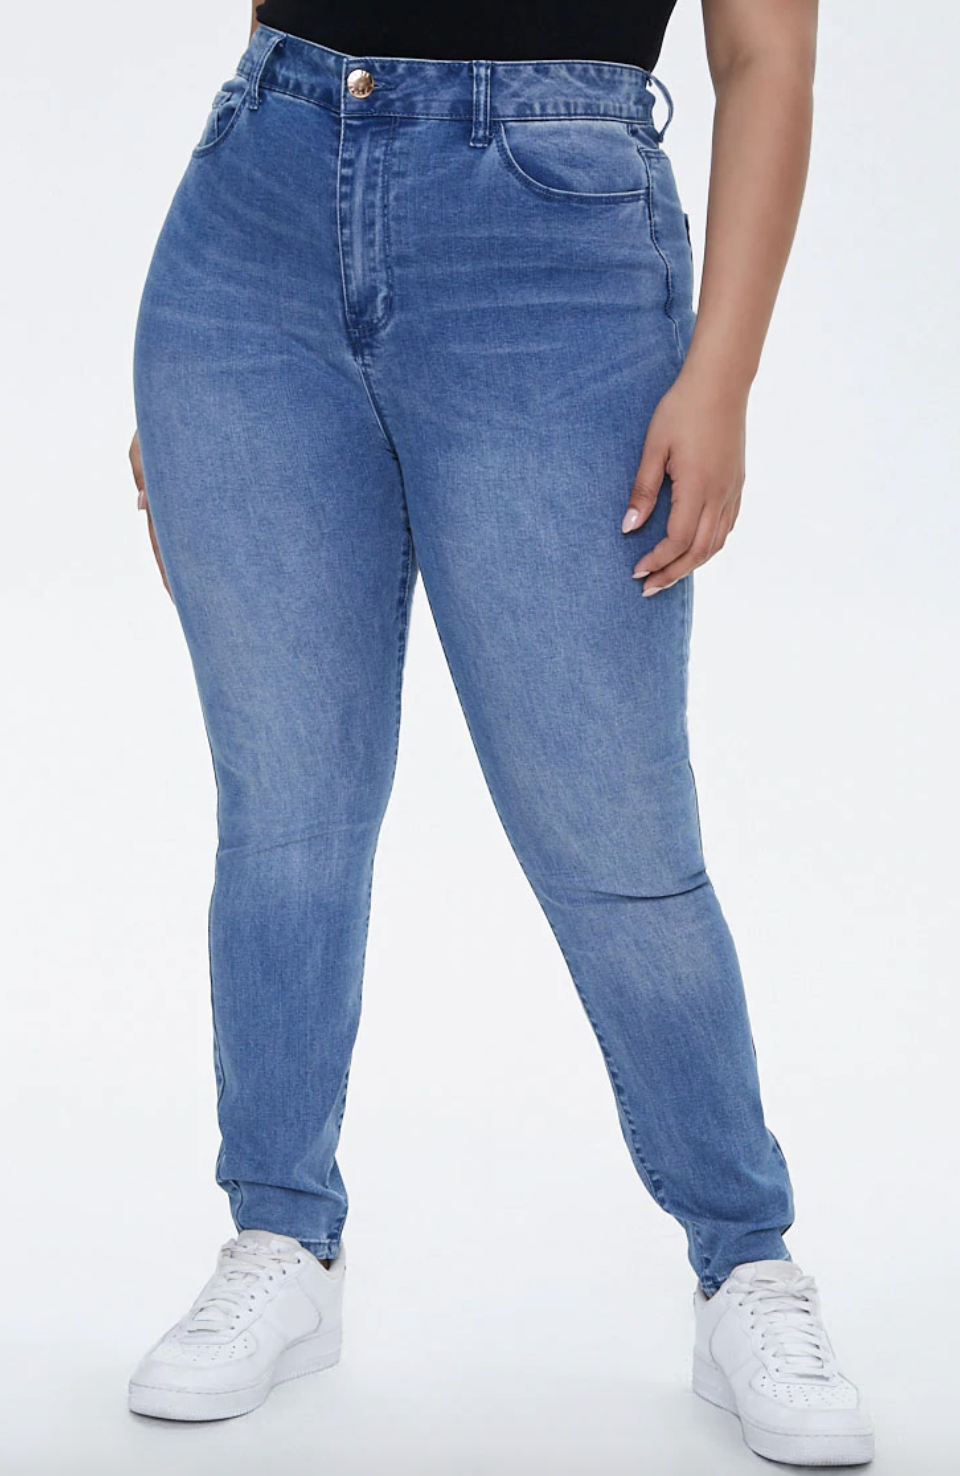 best stretch jeans for curves